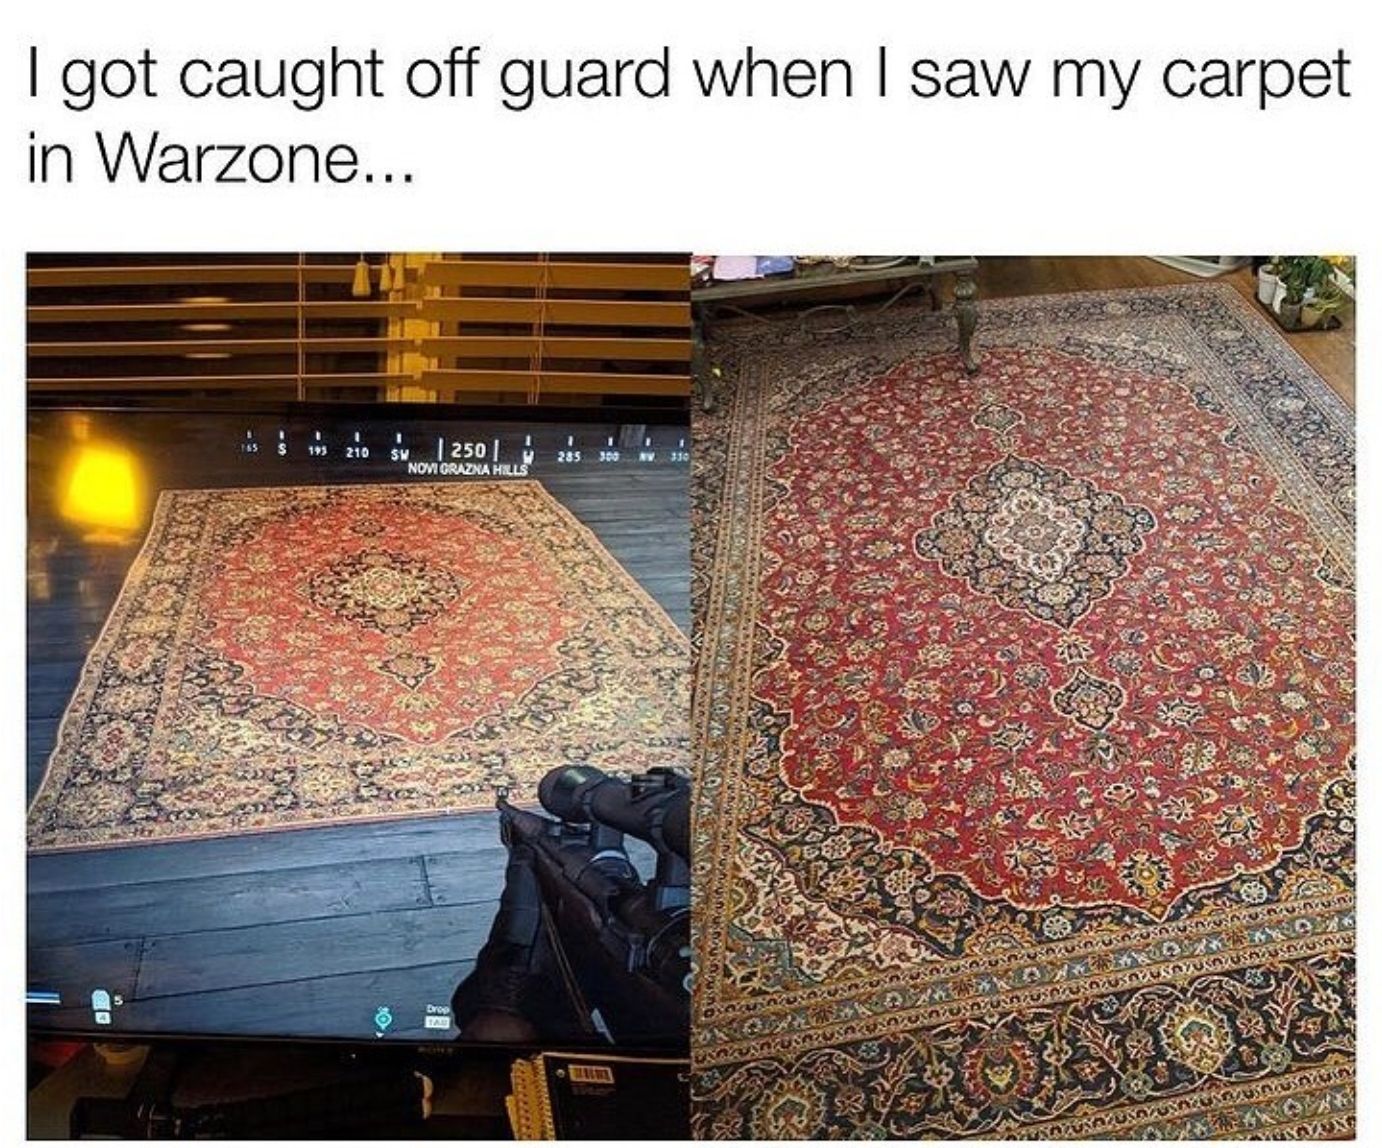 I also have that carpet